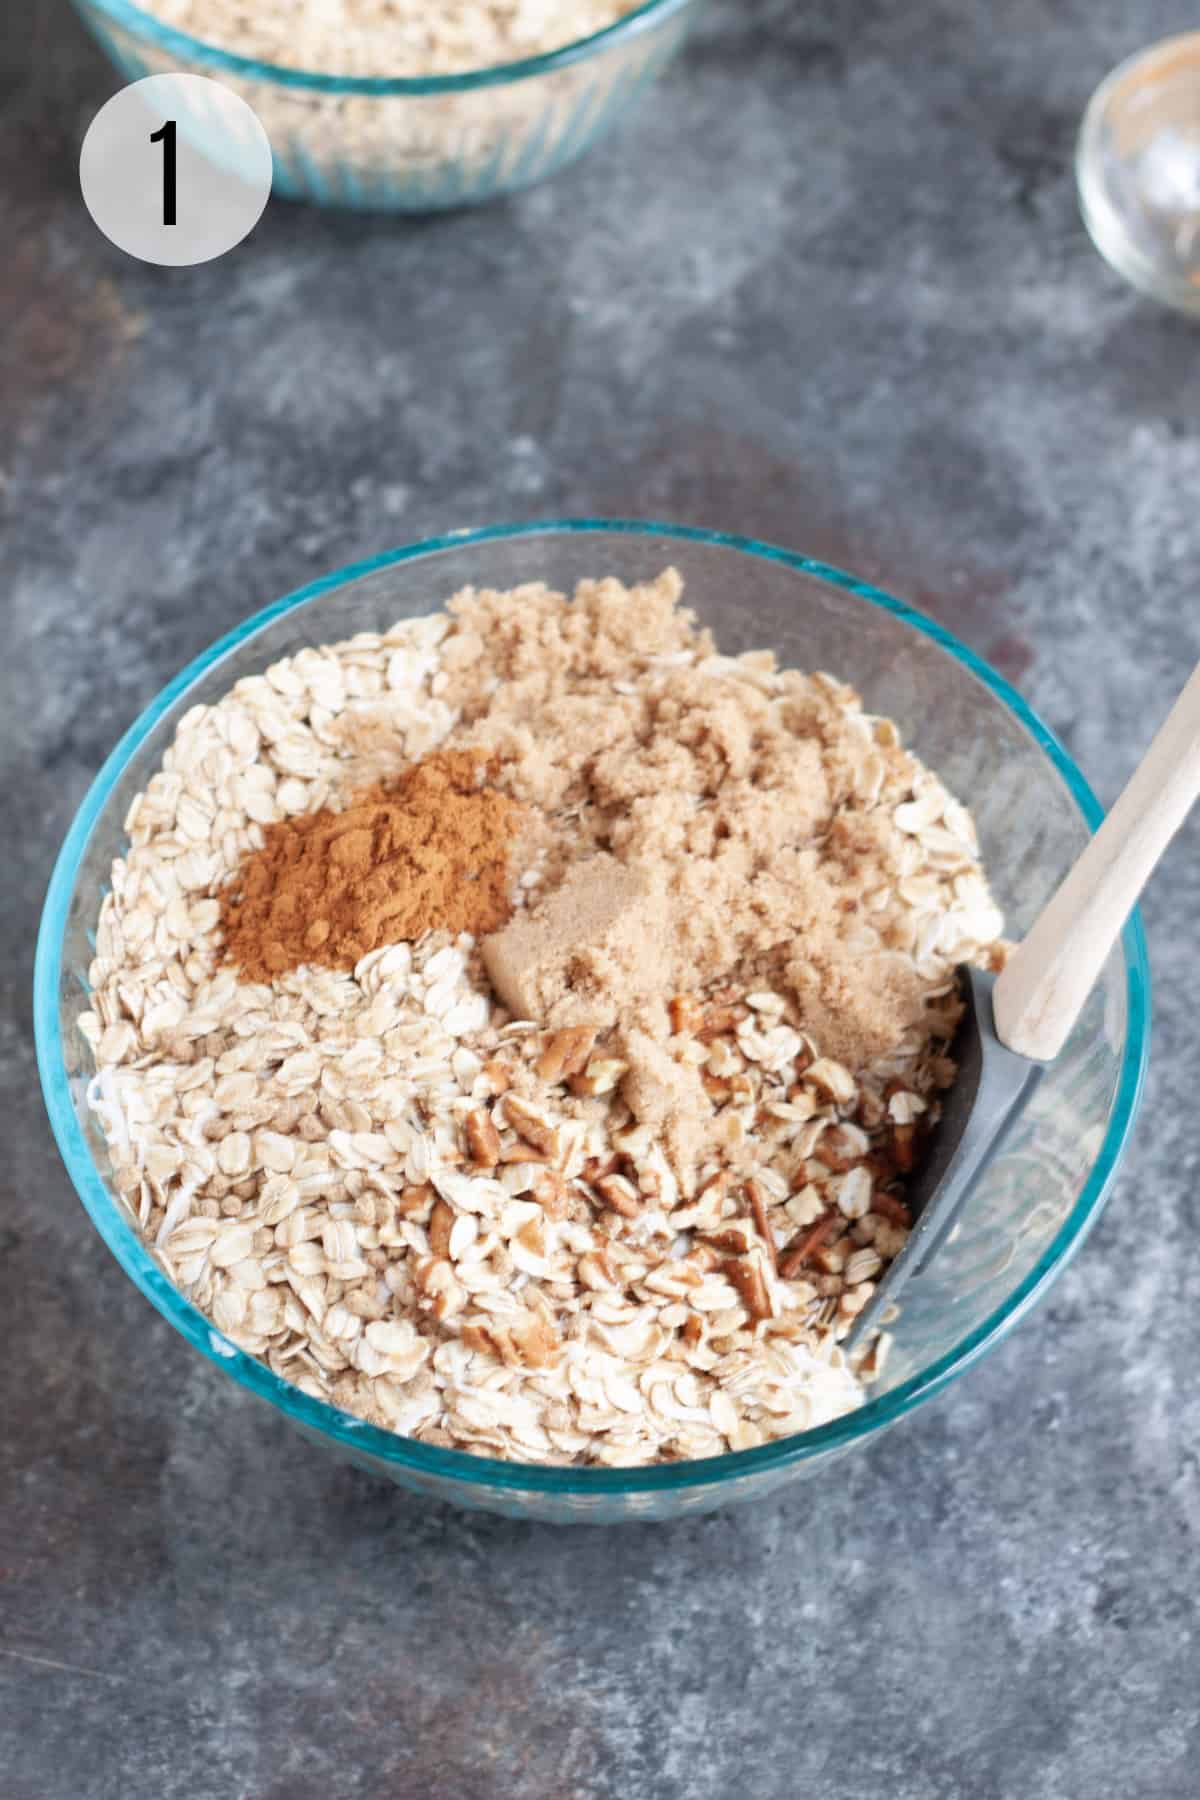 Glass bowl with ingredients for homemade granola like nuts, cinnamon, brown sugar and oatmeal with a grey rubber spatula. 